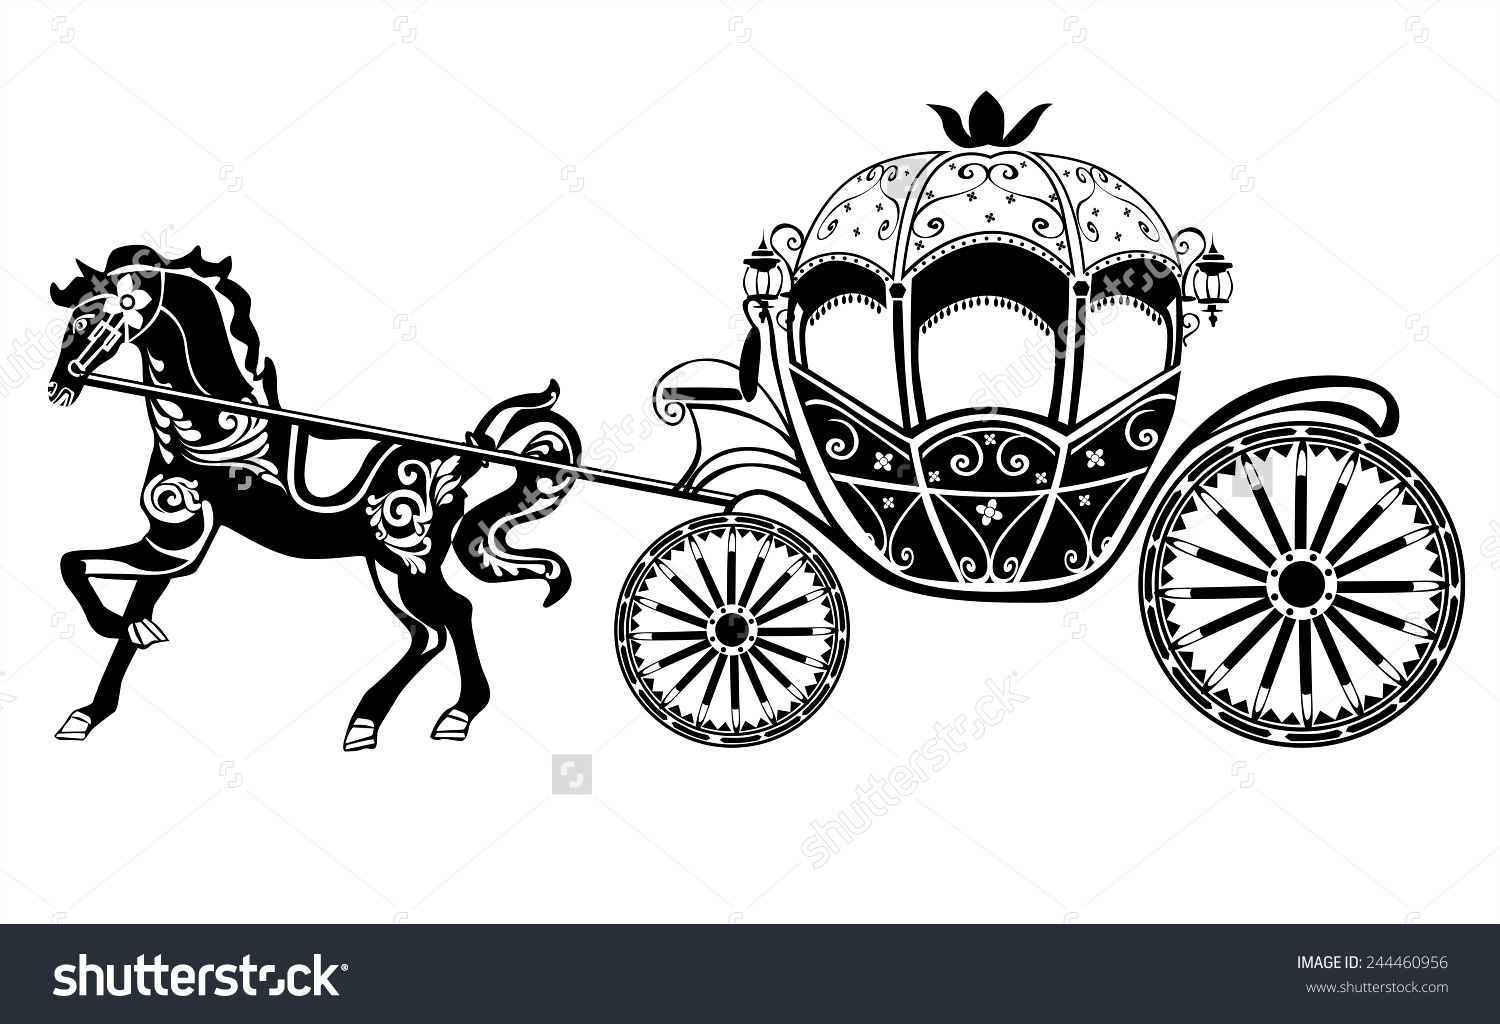 carriage clipart wedding carriage